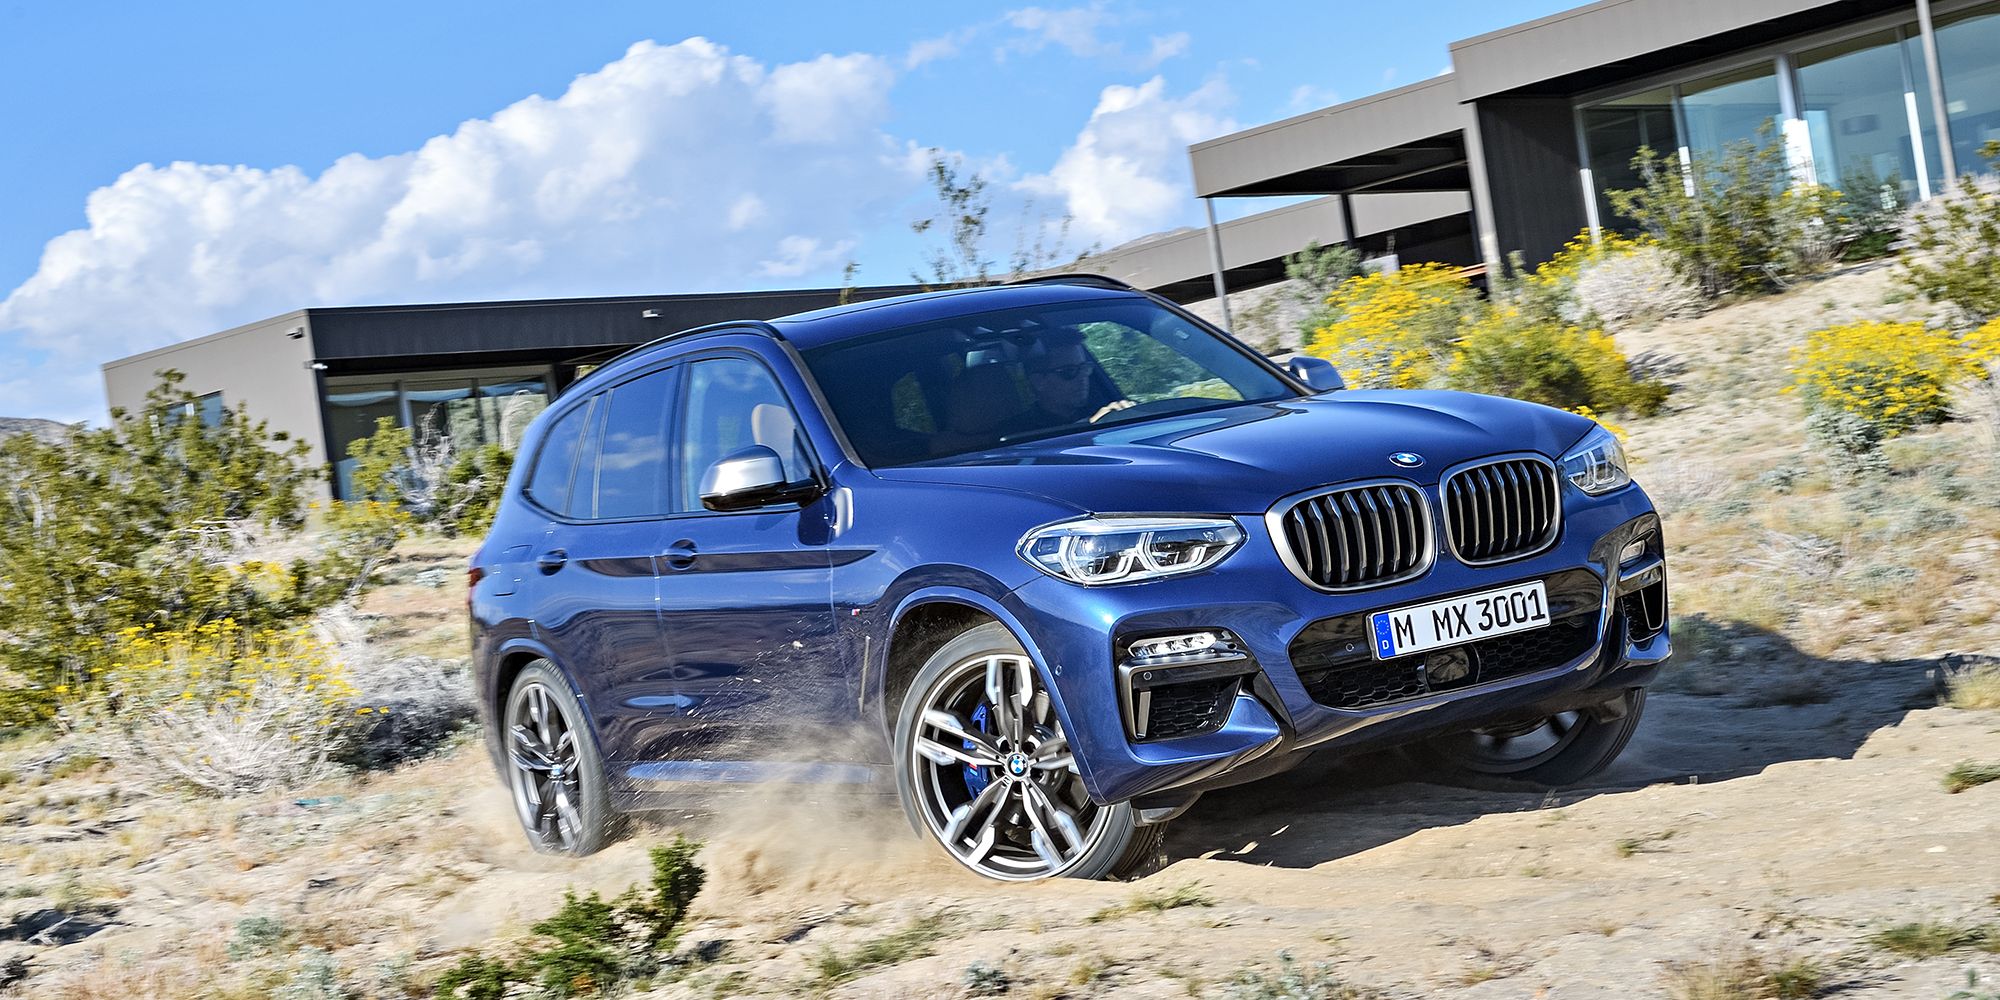 2018 BMW X3 M40i Packs 355 HP and Launch Control